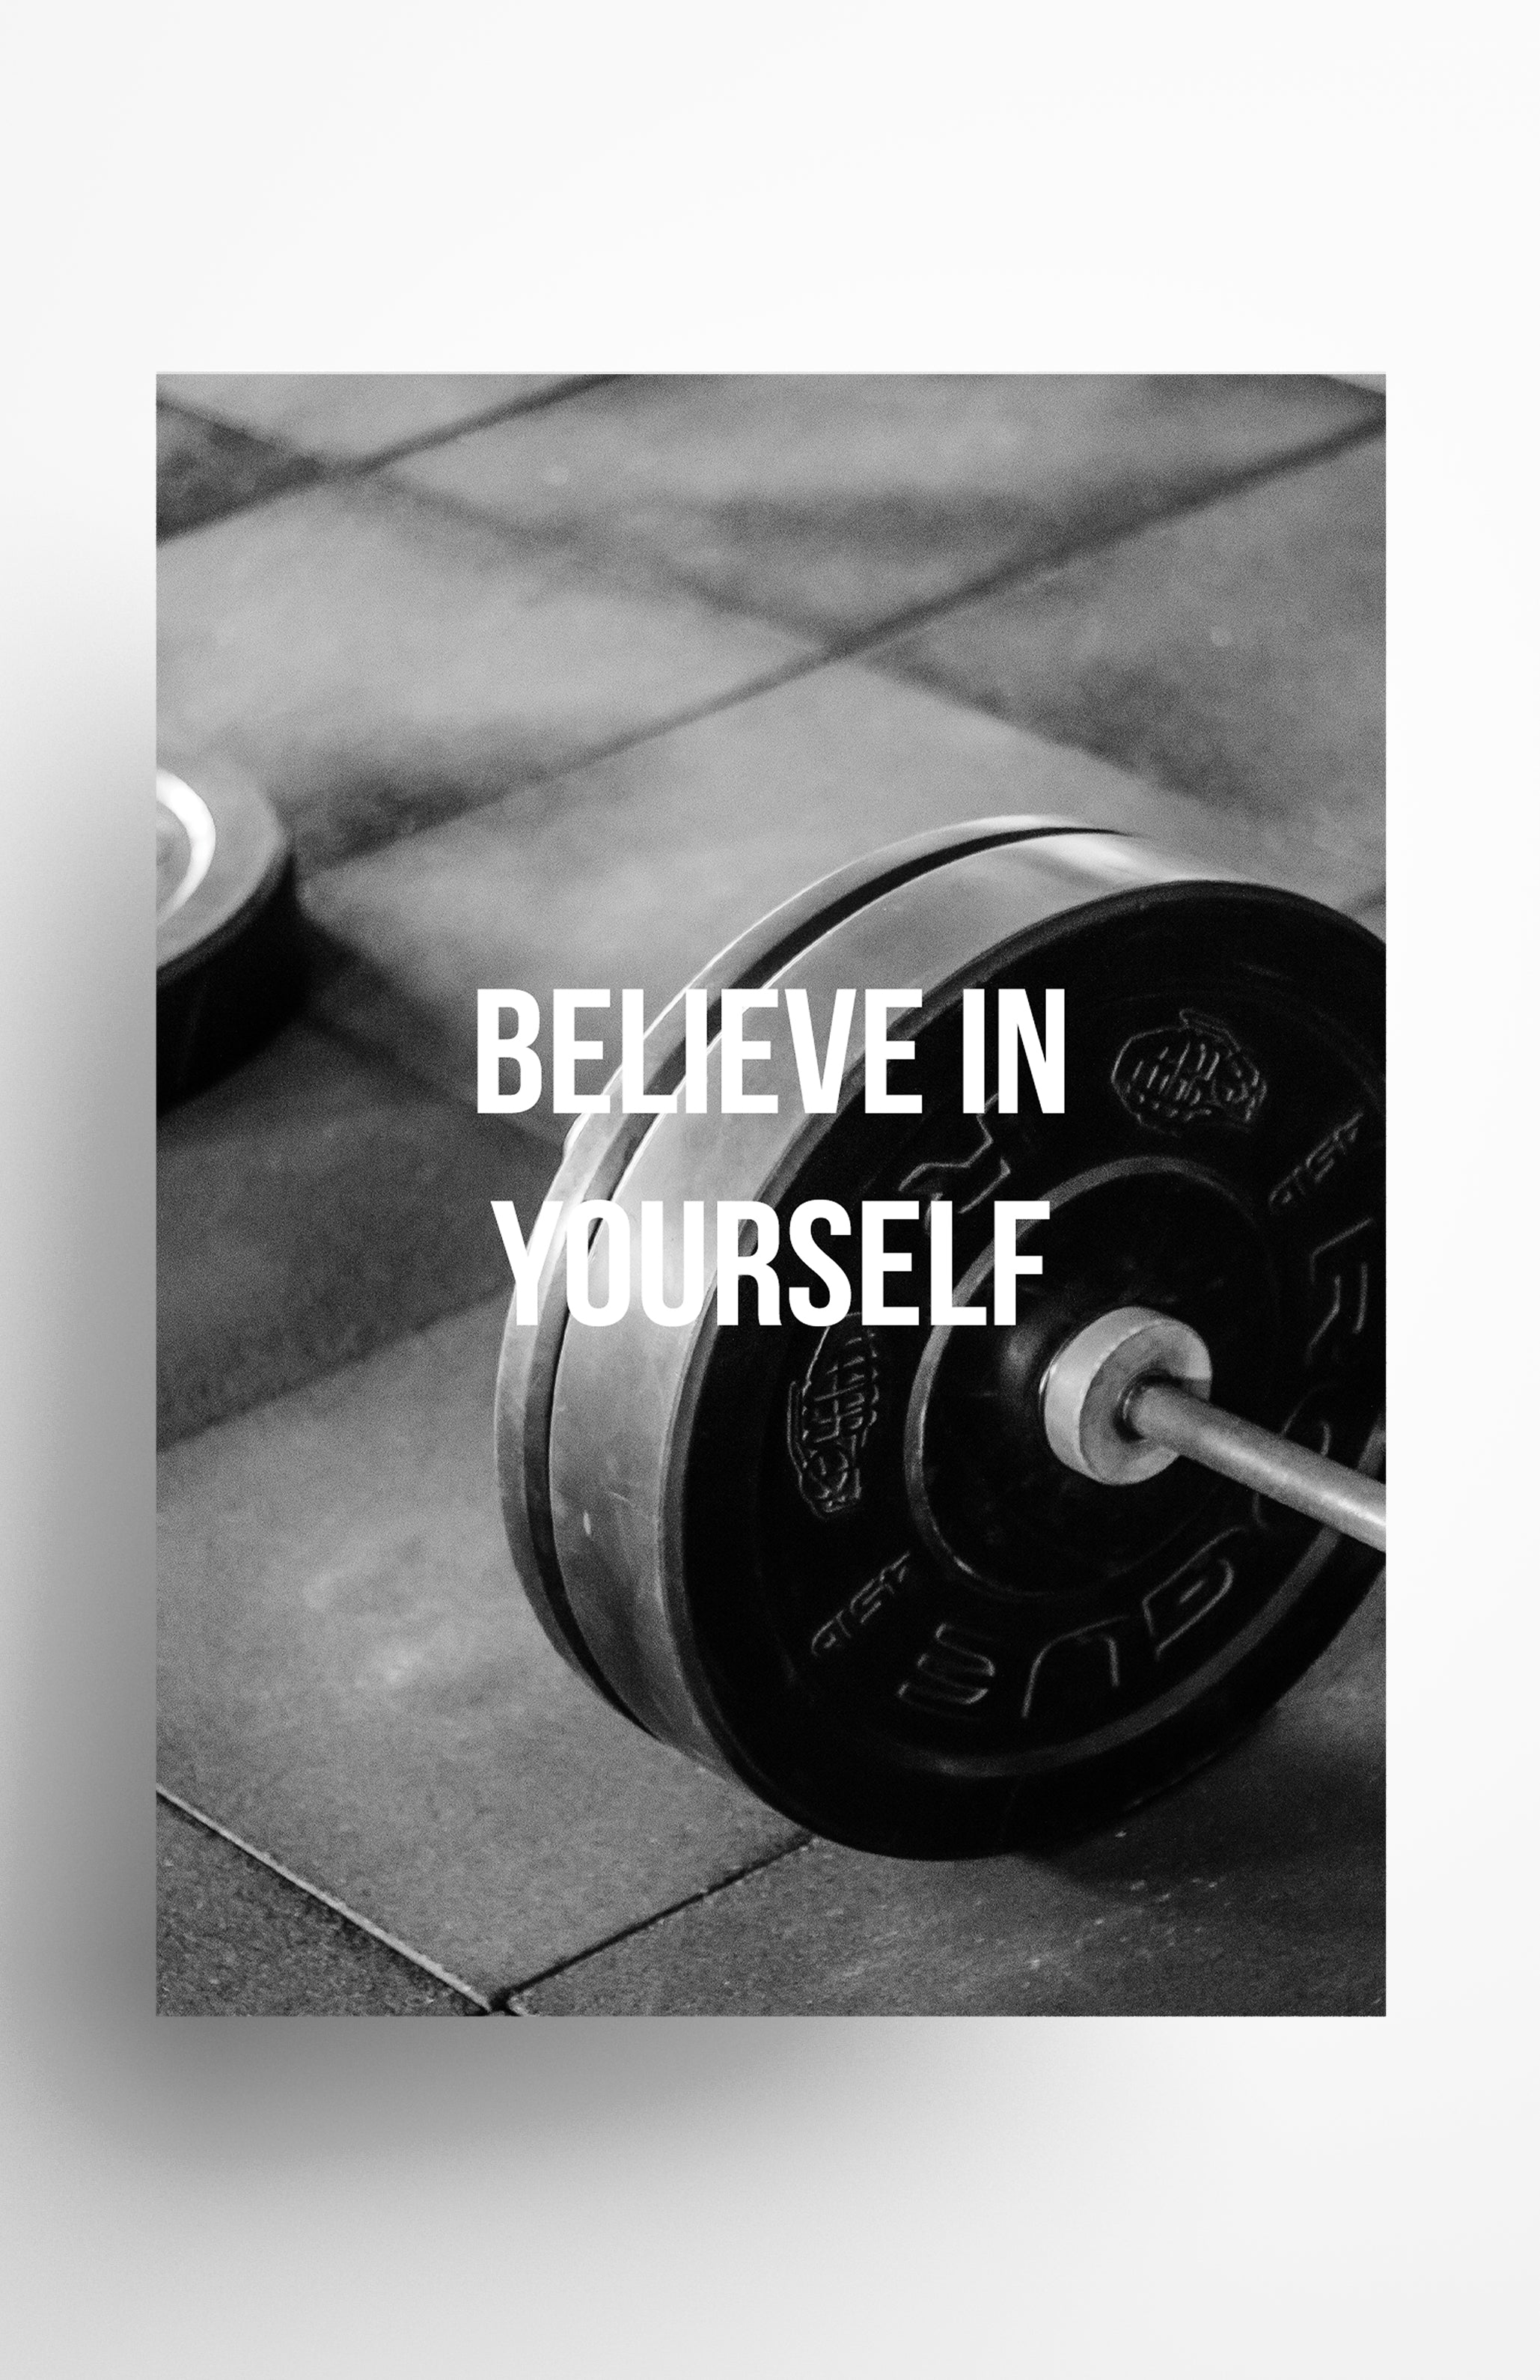 V3 Apparel womens Believe In Yourself, Motivational posters, mens inspirational wall artwork and empowering poster quote designs for office, home gym, school, kitchen and living room.